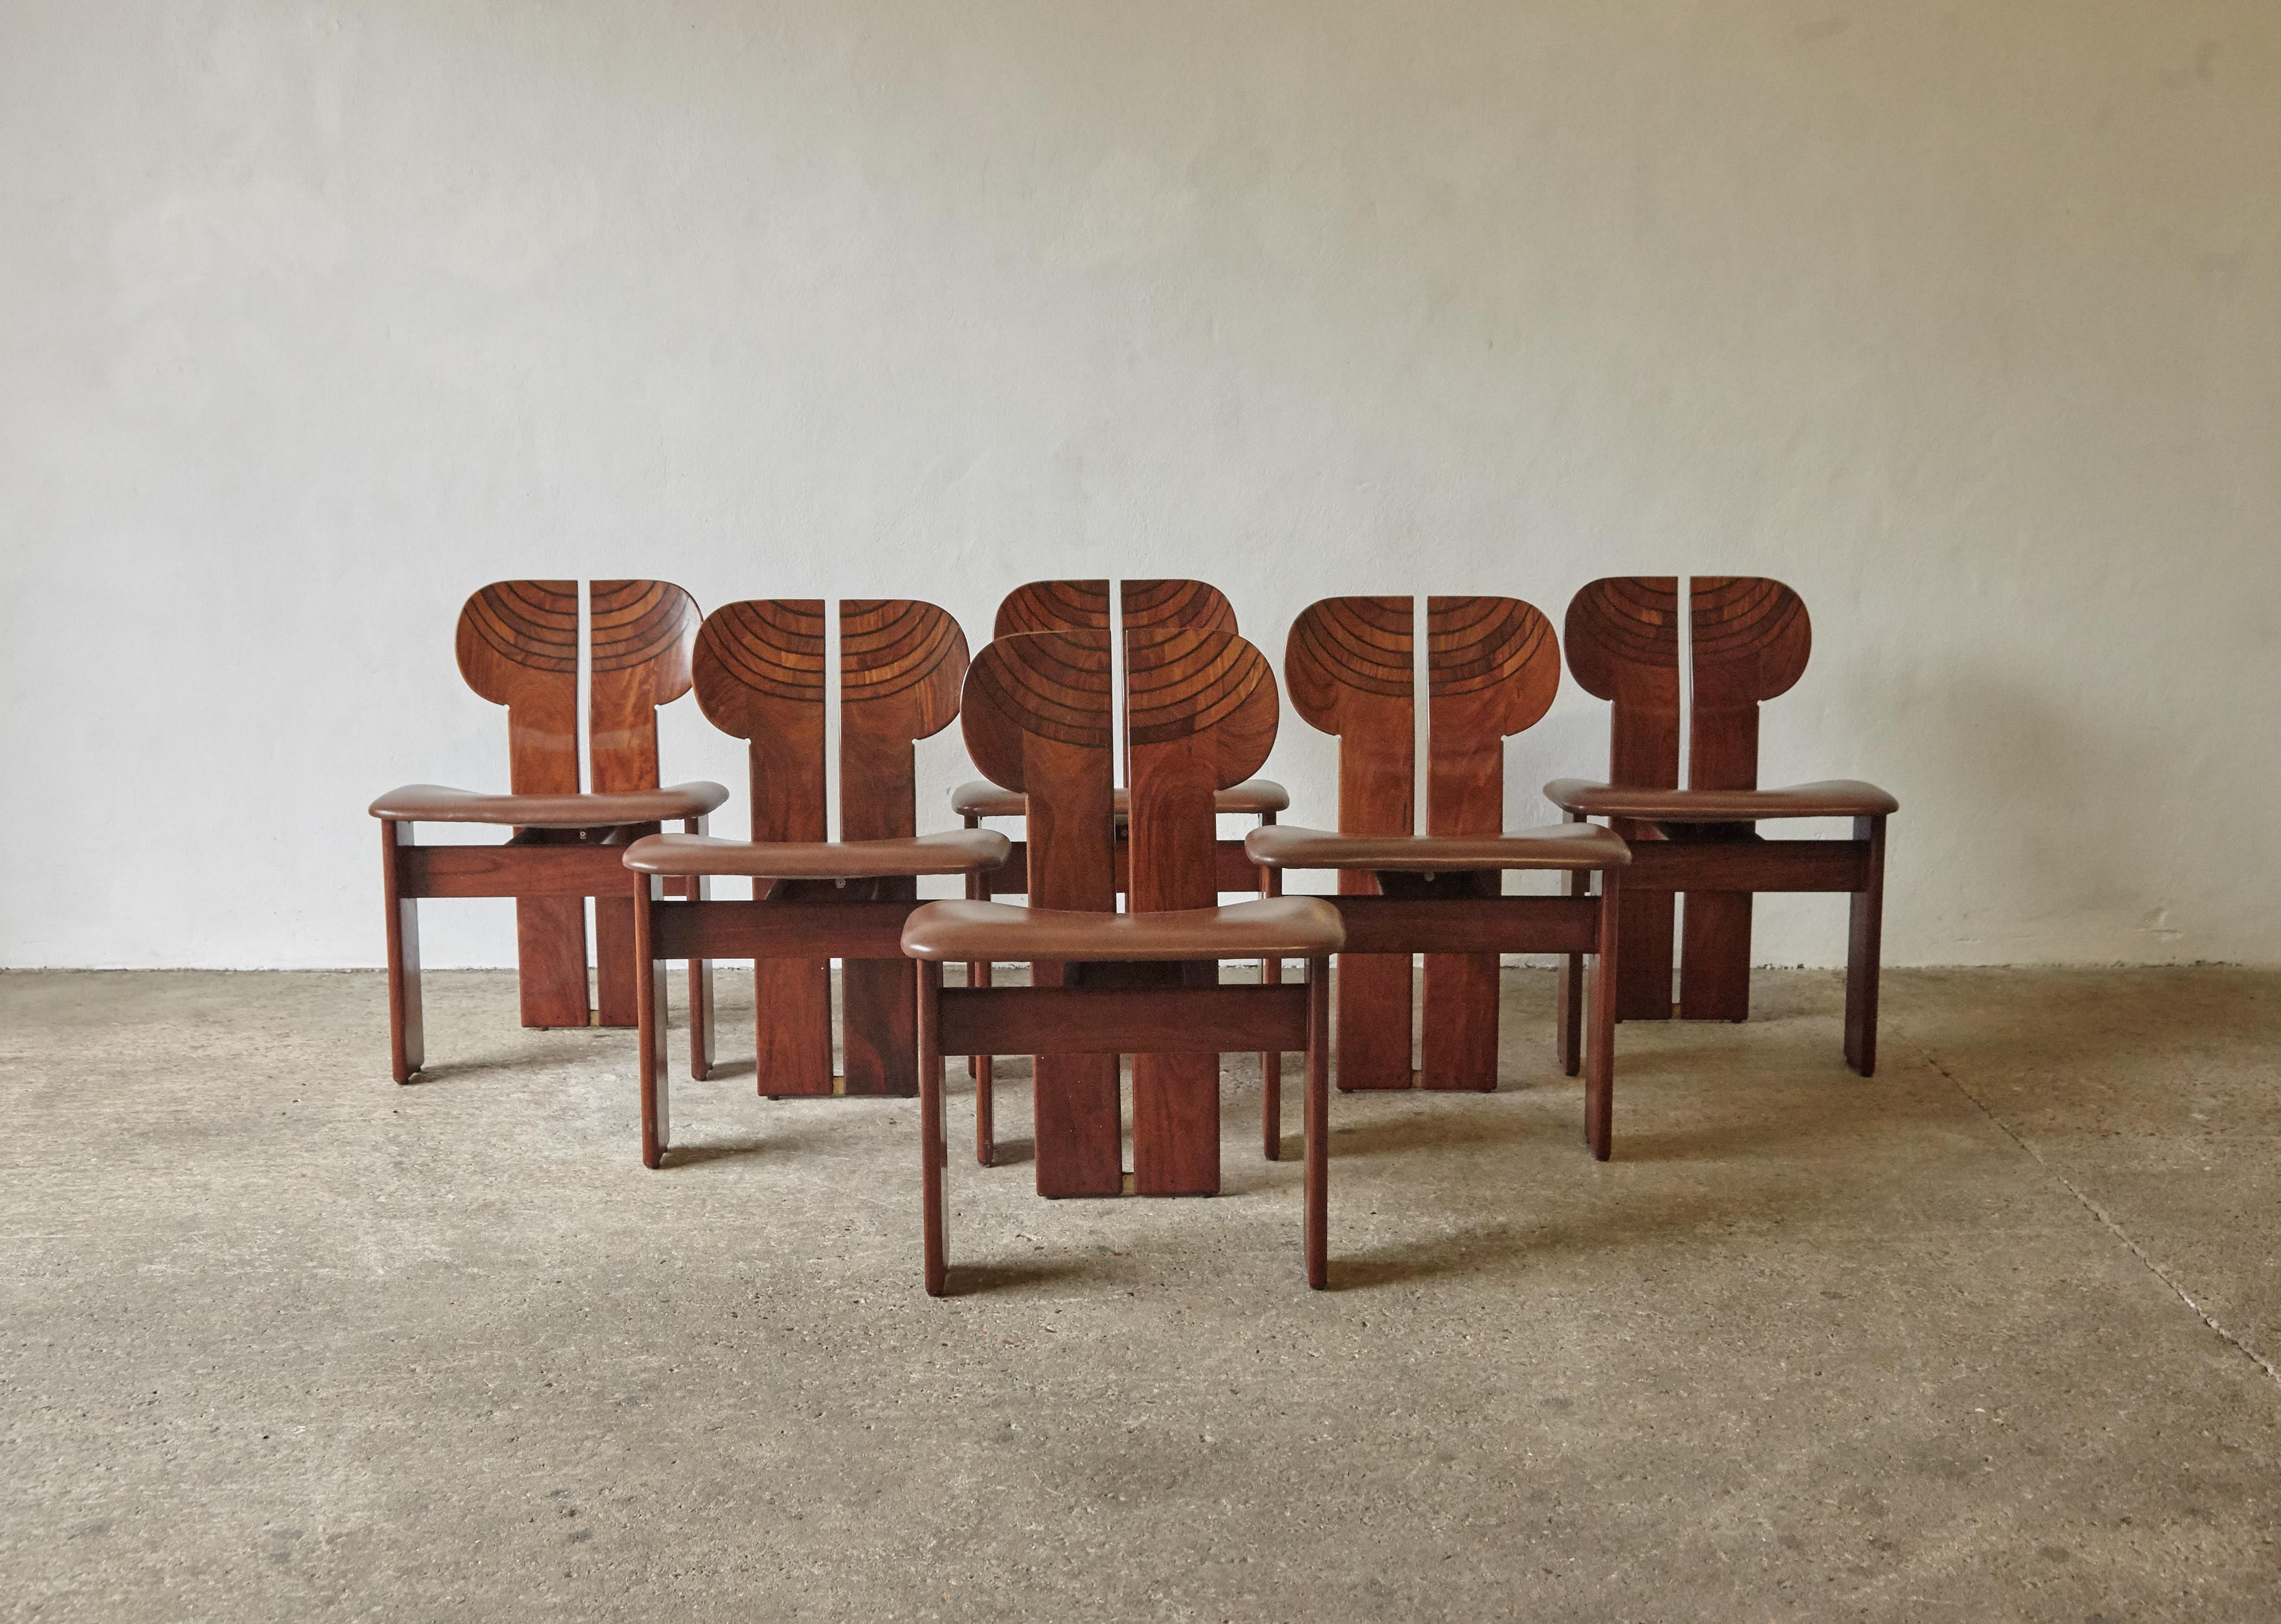 A rare set of six stunning Africa chairs designed by Afra & Tobia Scarpa in the 1970s, and produced by Maxalto, Italy. These are great examples in rare exotic hardwood, burl, black leather and brass. Very good original condition with normal minor